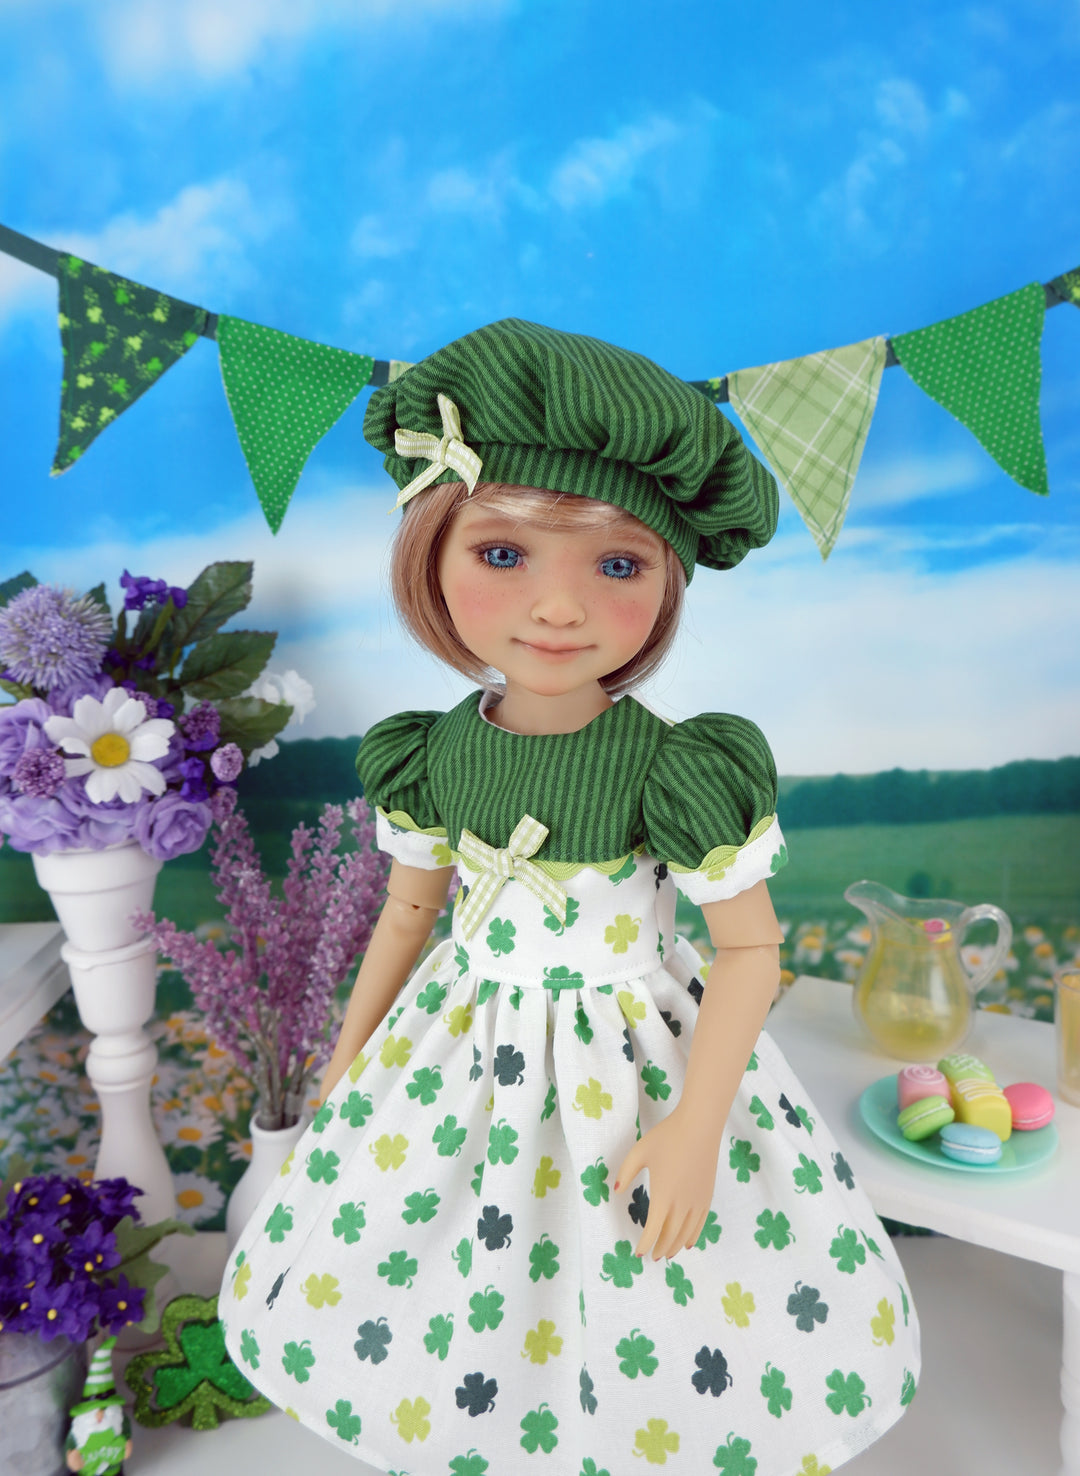 Clover for Luck - dress and shoes for Ruby Red Fashion Friends doll